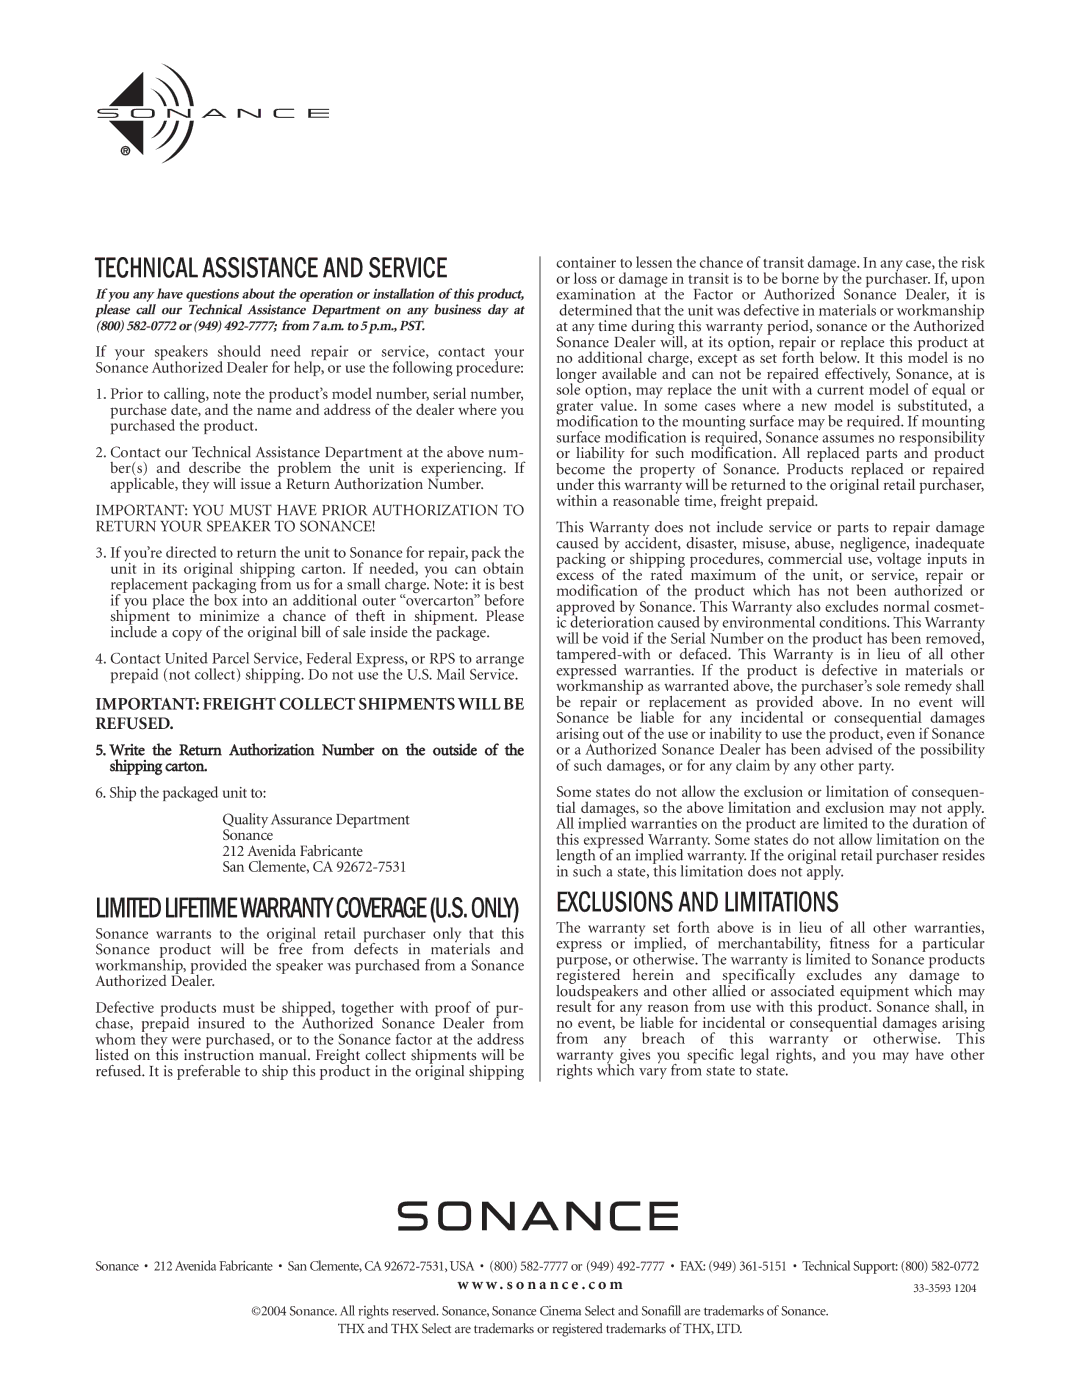 Sonance THX instruction manual Technical Assistance and Service, Exclusions and Limitations 